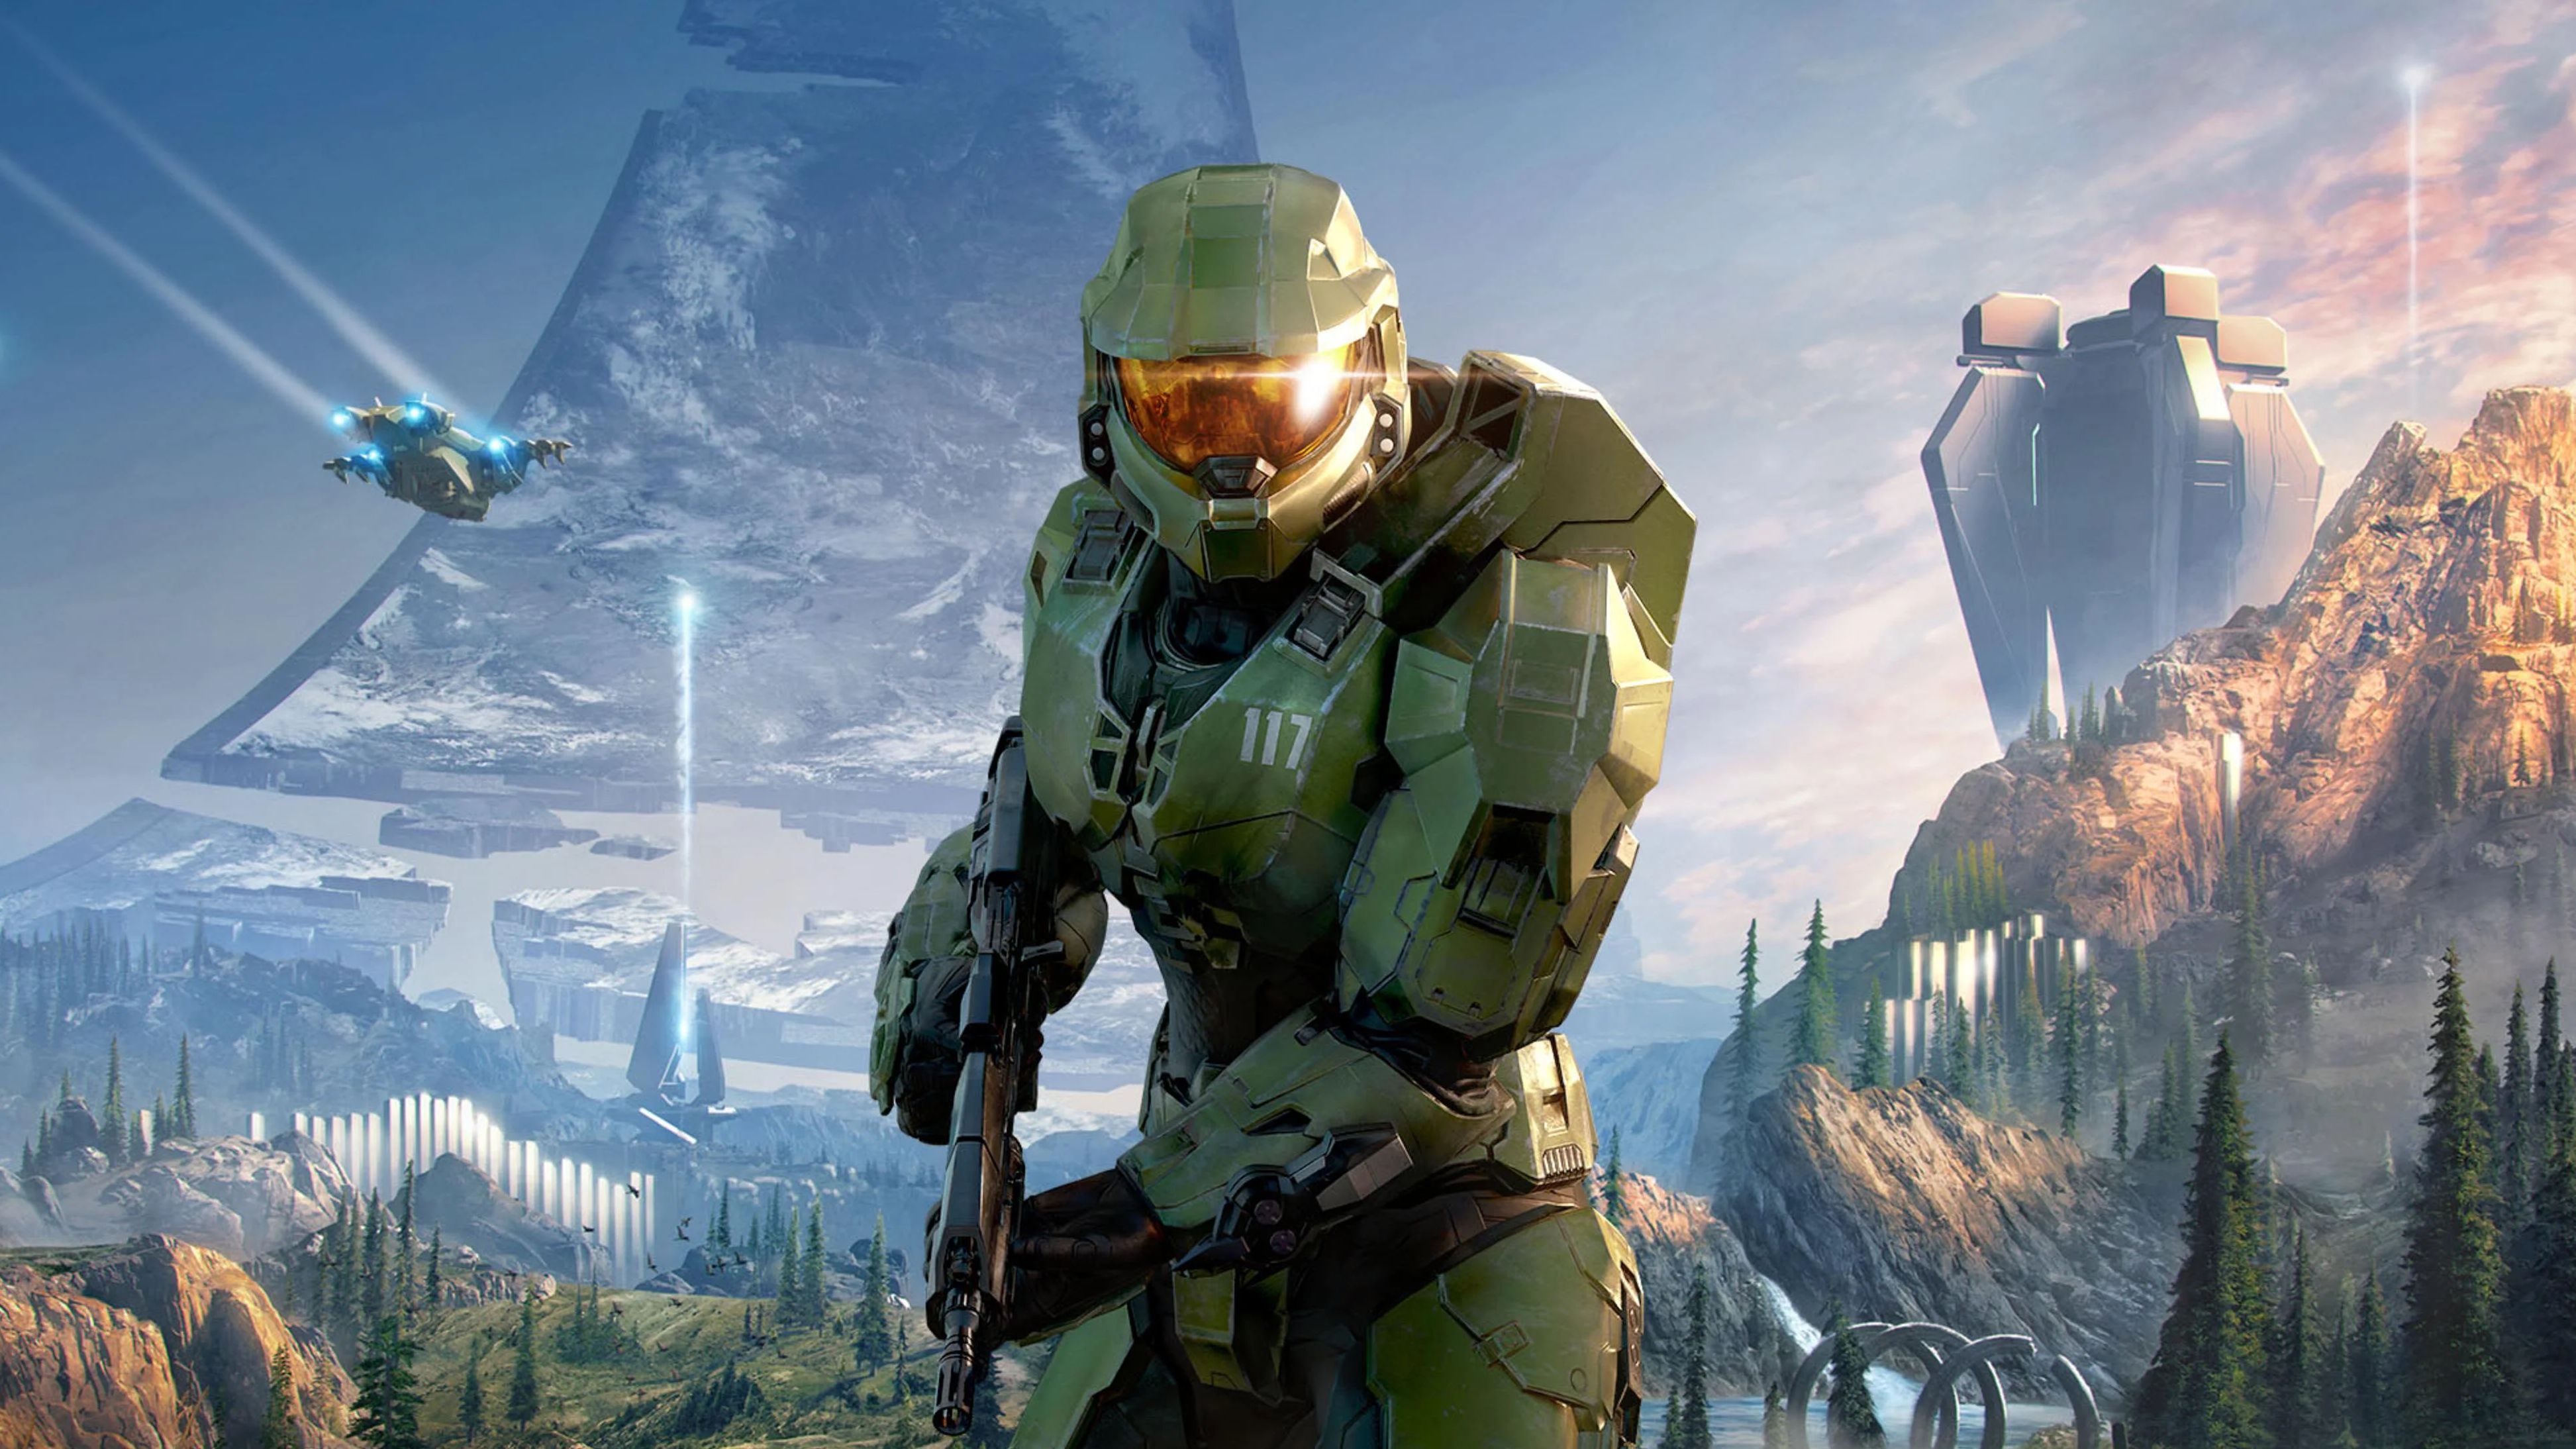 Image for Halo Infinite campaign review: the ultimate solo Halo experience